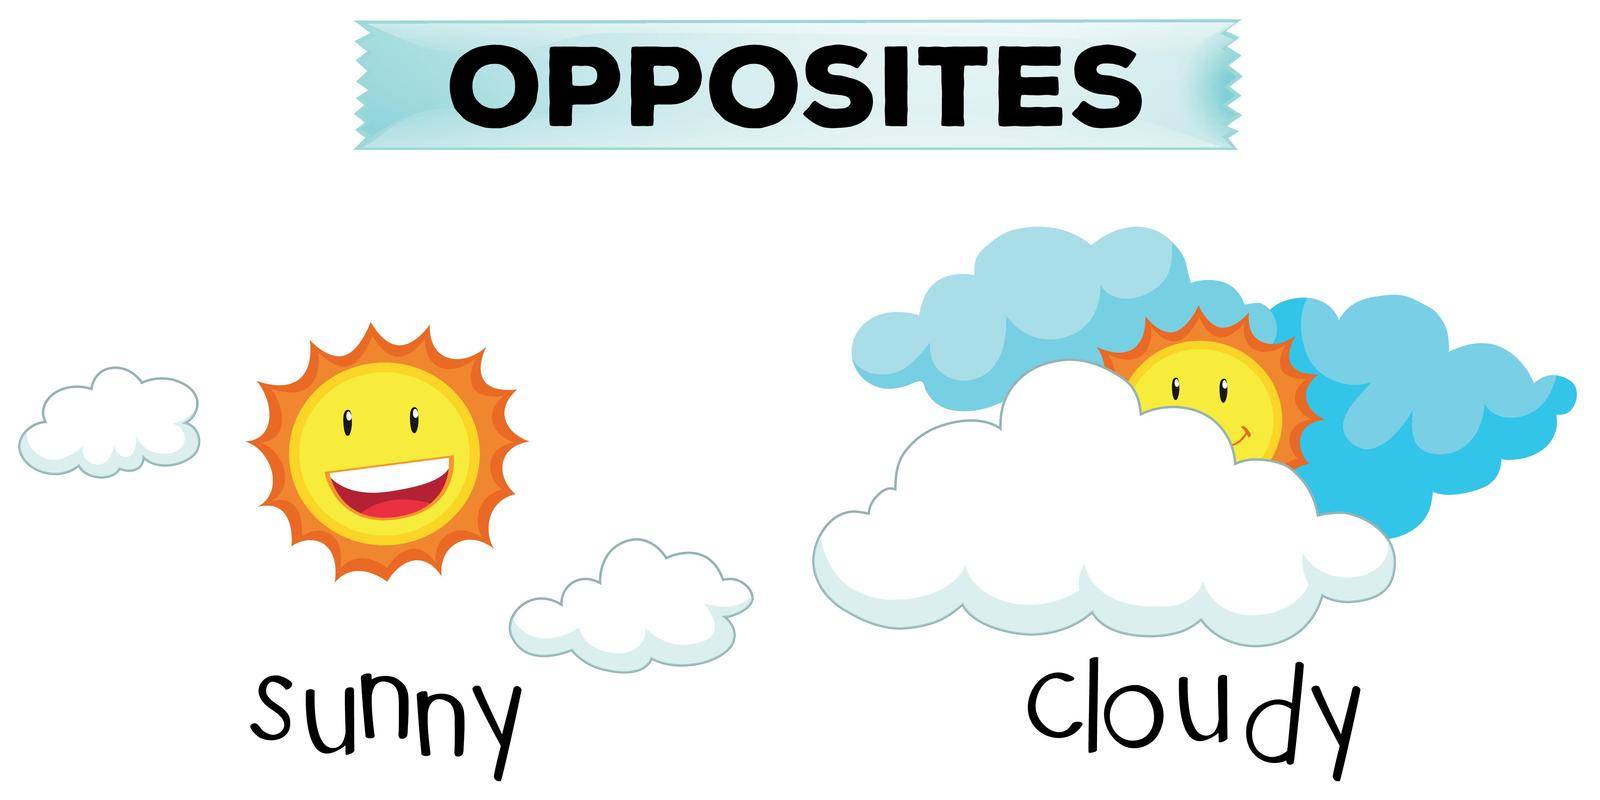 Opposite words for sunny and cloudy illustration